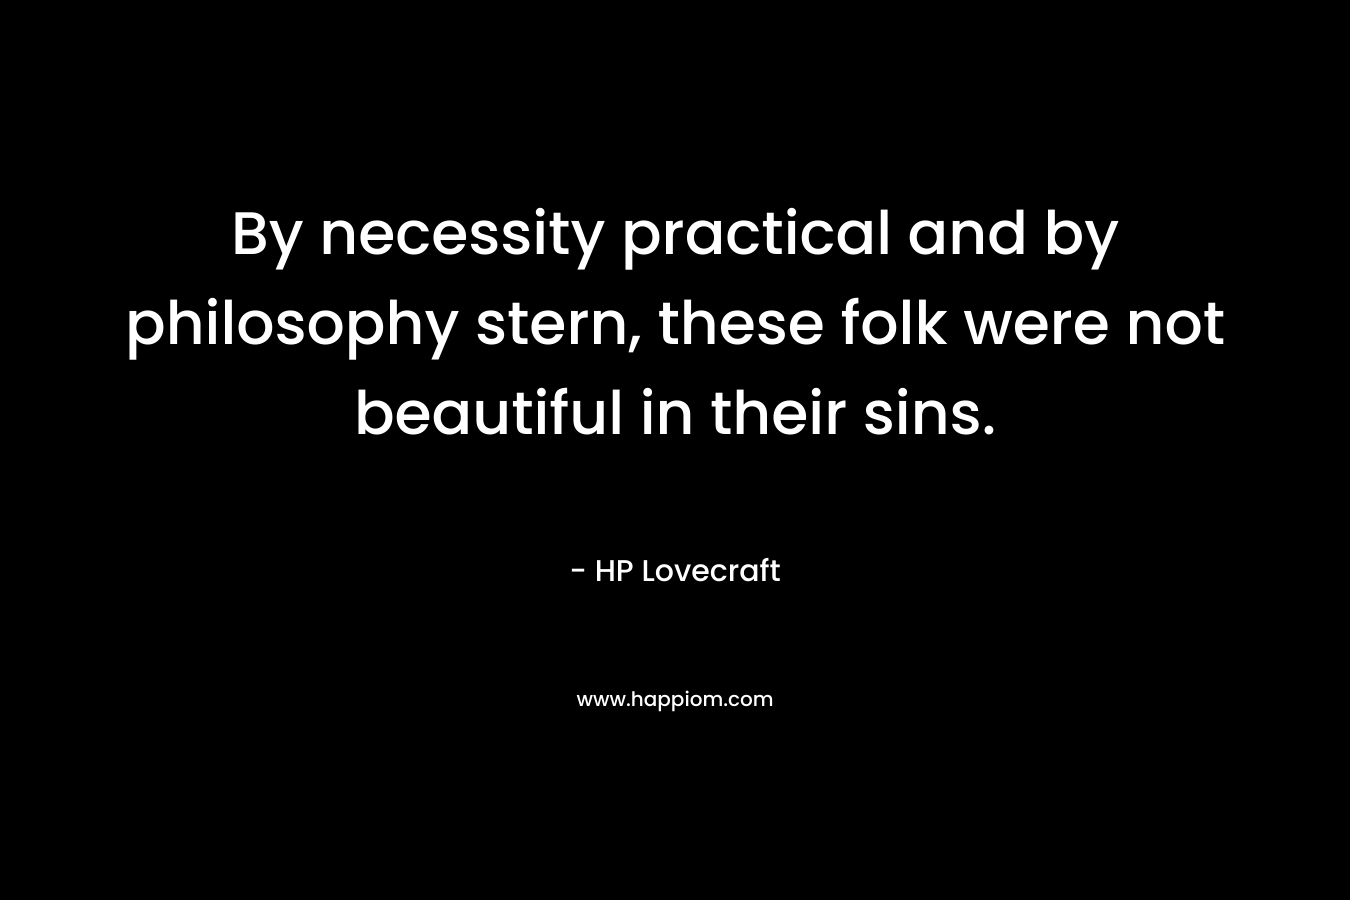 By necessity practical and by philosophy stern, these folk were not beautiful in their sins.